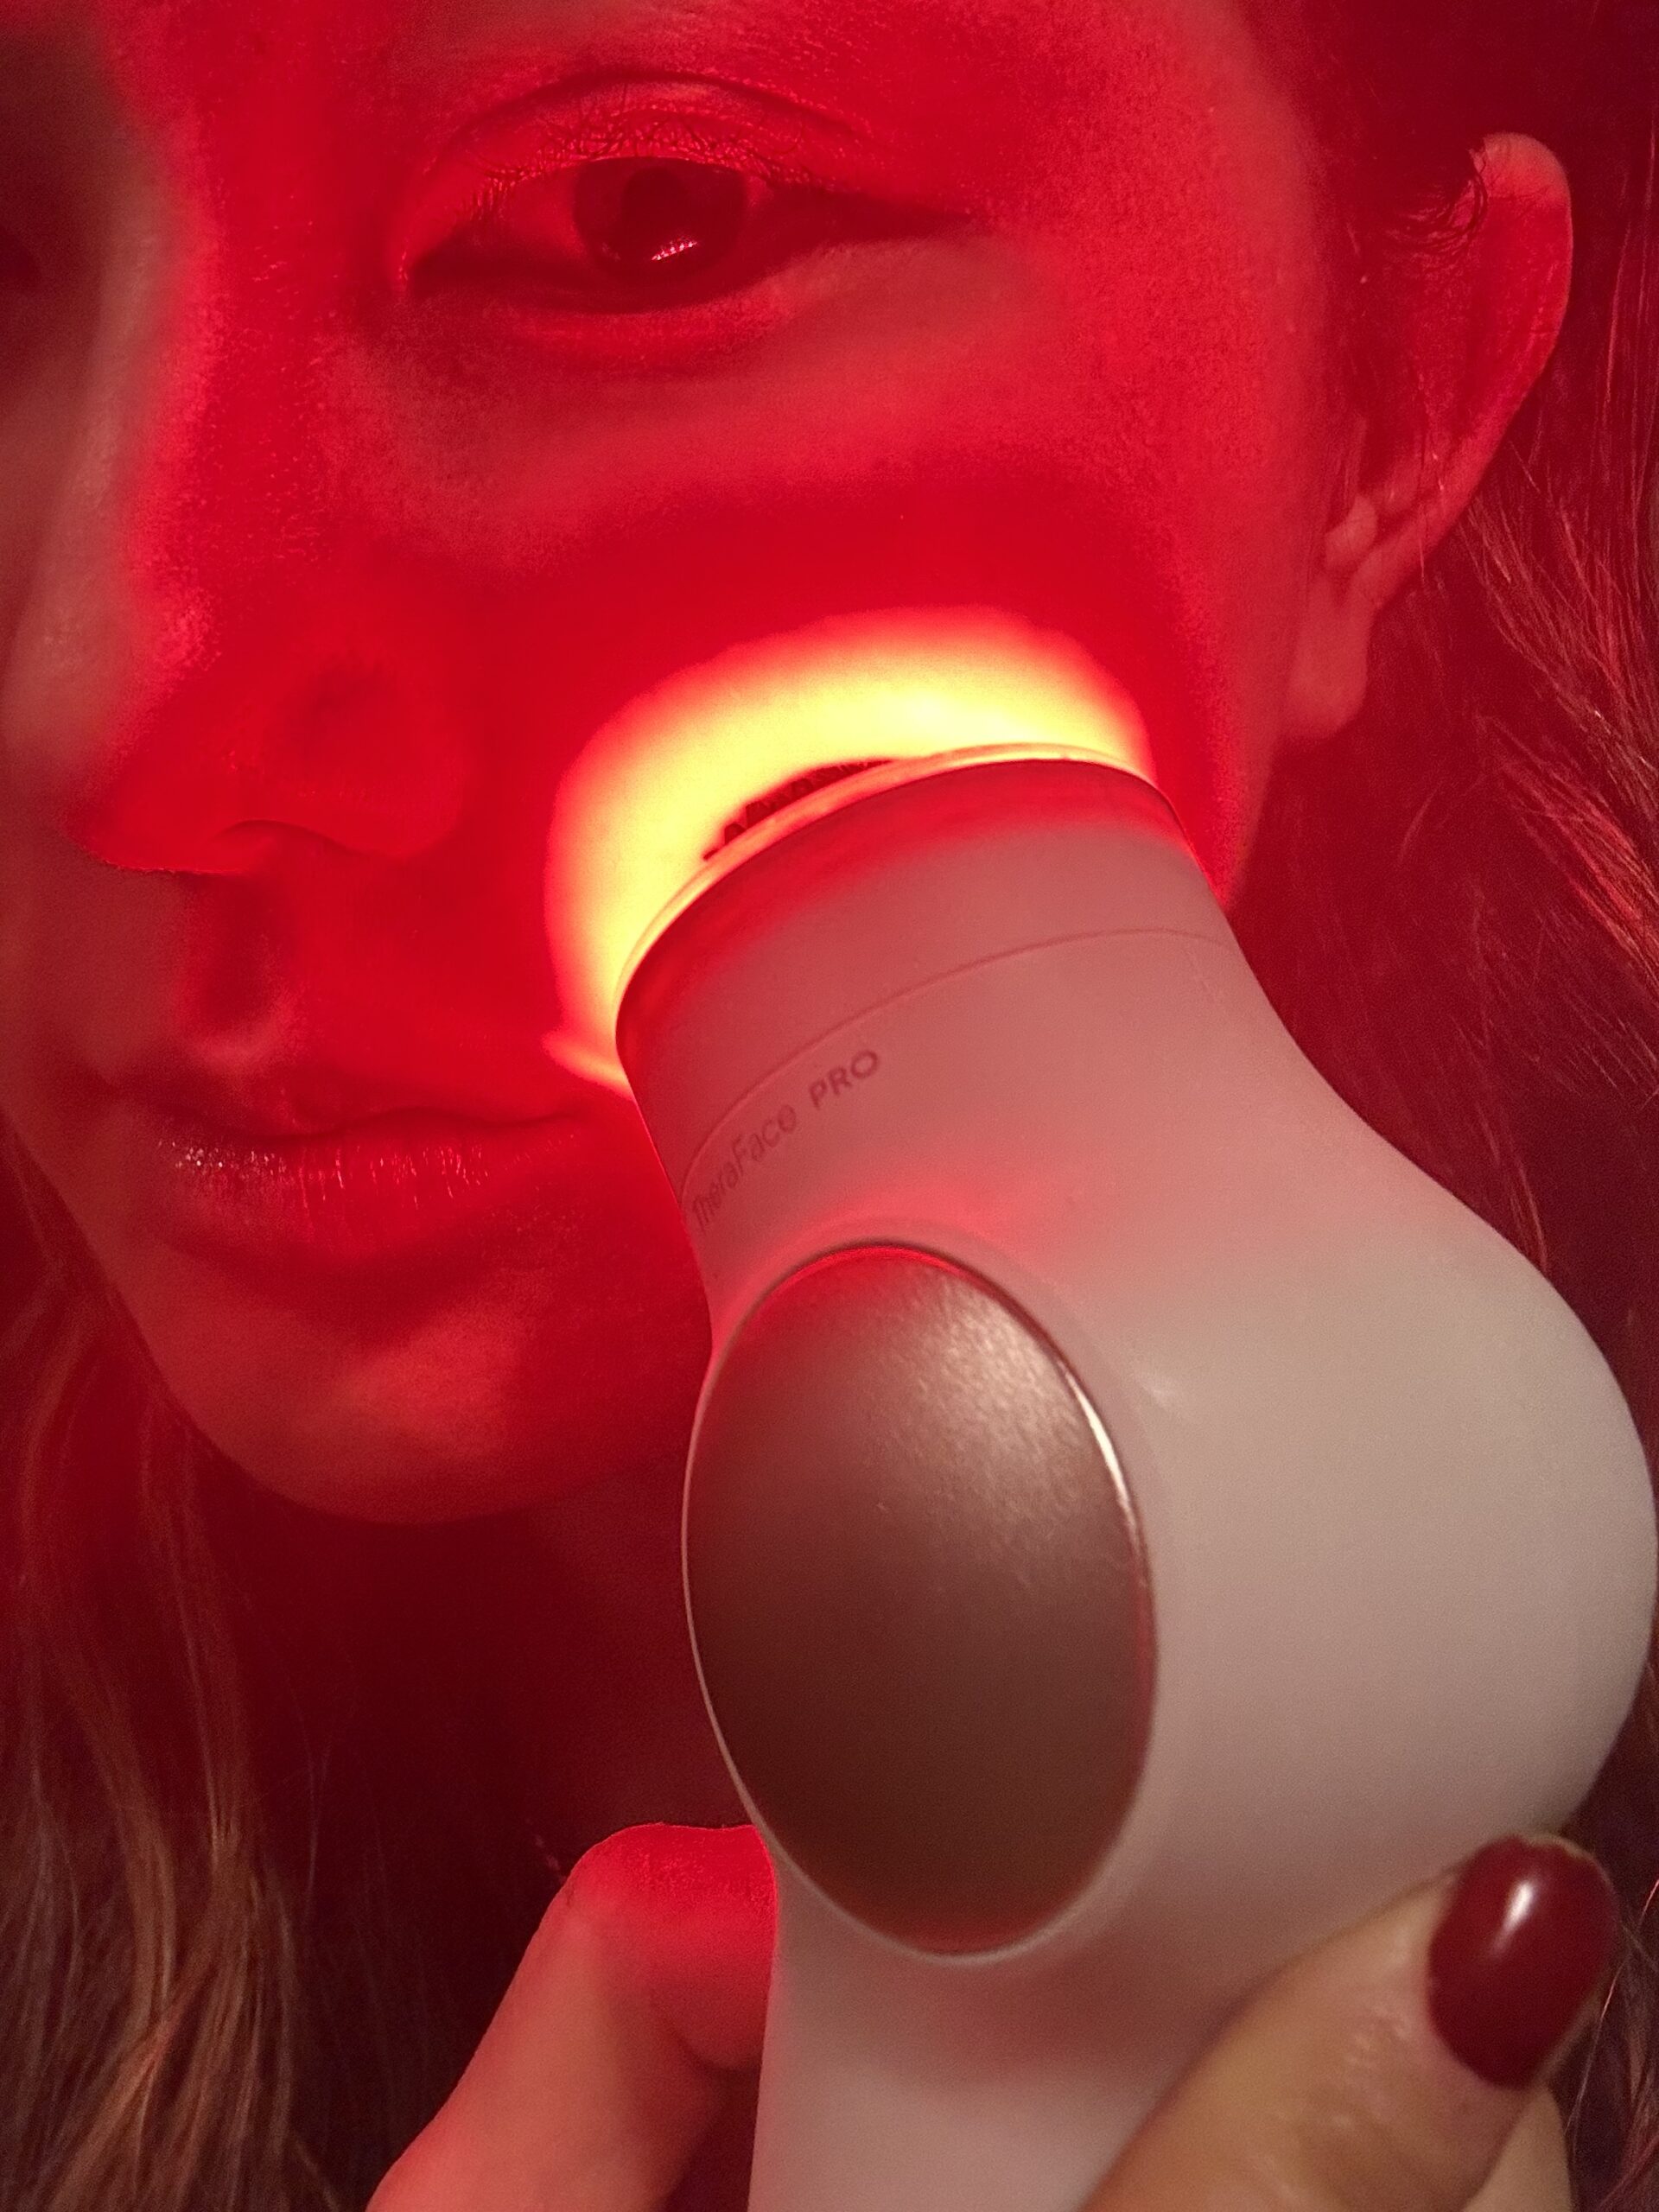 TheraFace led light therapy